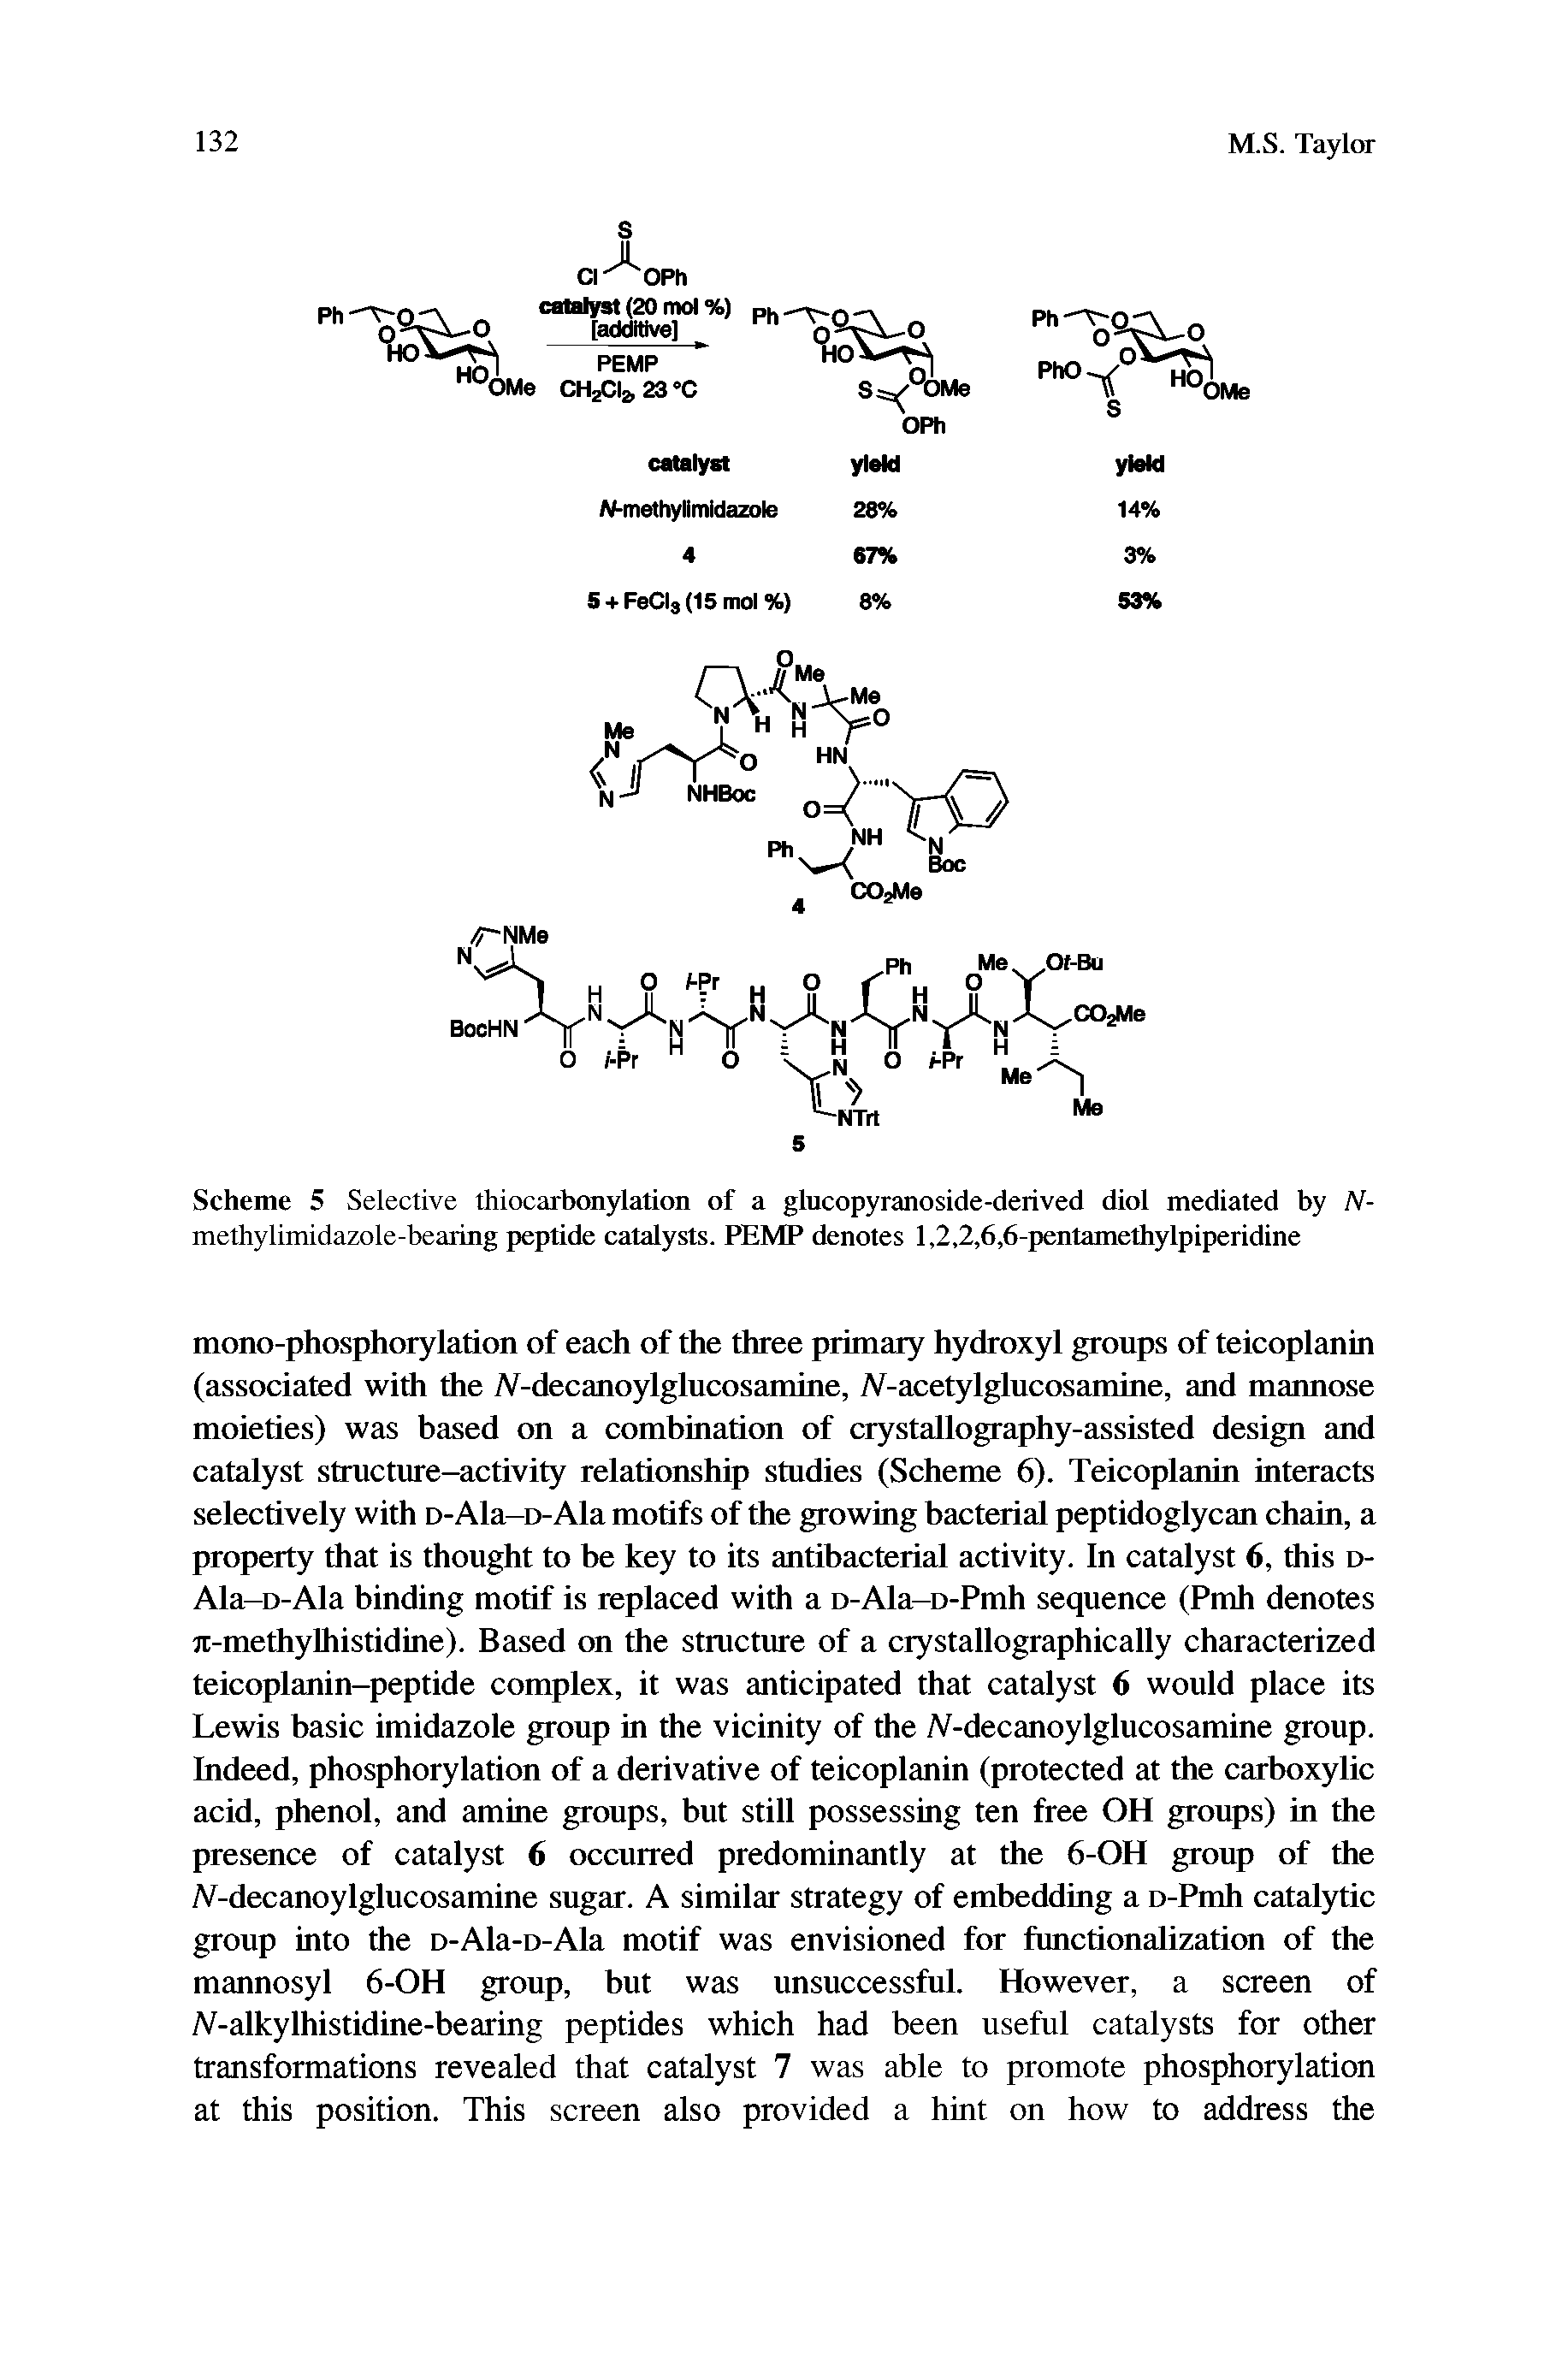 Scheme 5 Selective thiocarbonylation of a glucopyranoside-derived diol mediated by N-methylimidazole-bearing peptide catalysts. PEMP denotes 1,2,2,6,6-pentamethylpiperidine...